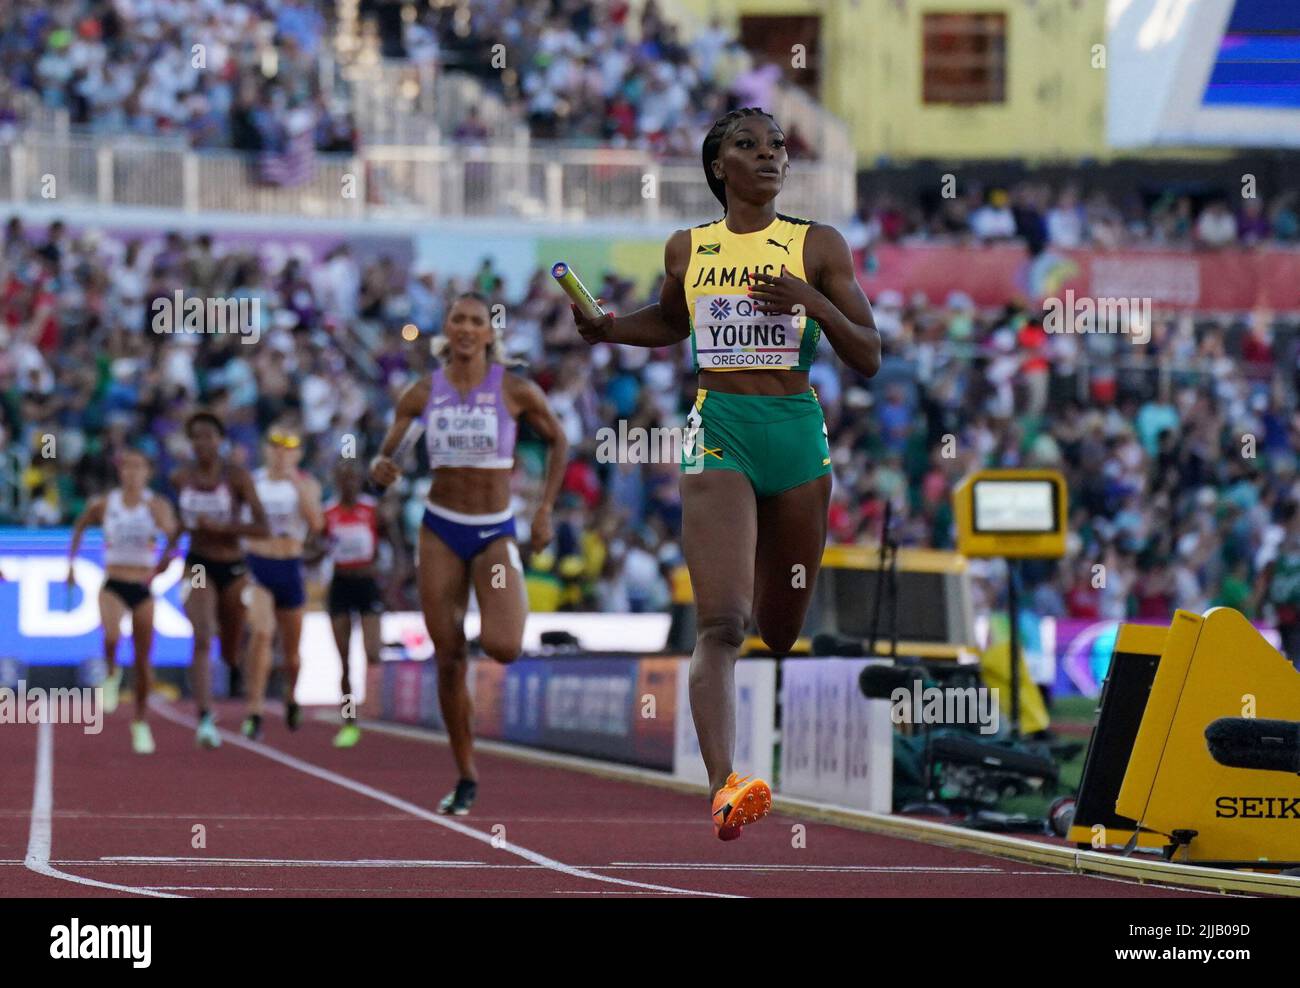 Athletics - World Athletics Championships - Women's 4x400 Metres Relay - Final - Hayward Field, Eugene, Oregon, U.S. - July 24, 2022 Jamaica's Charokee Young finishes the women's 4x400 metres final in second place REUTERS/Lucy Nicholson Stock Photo